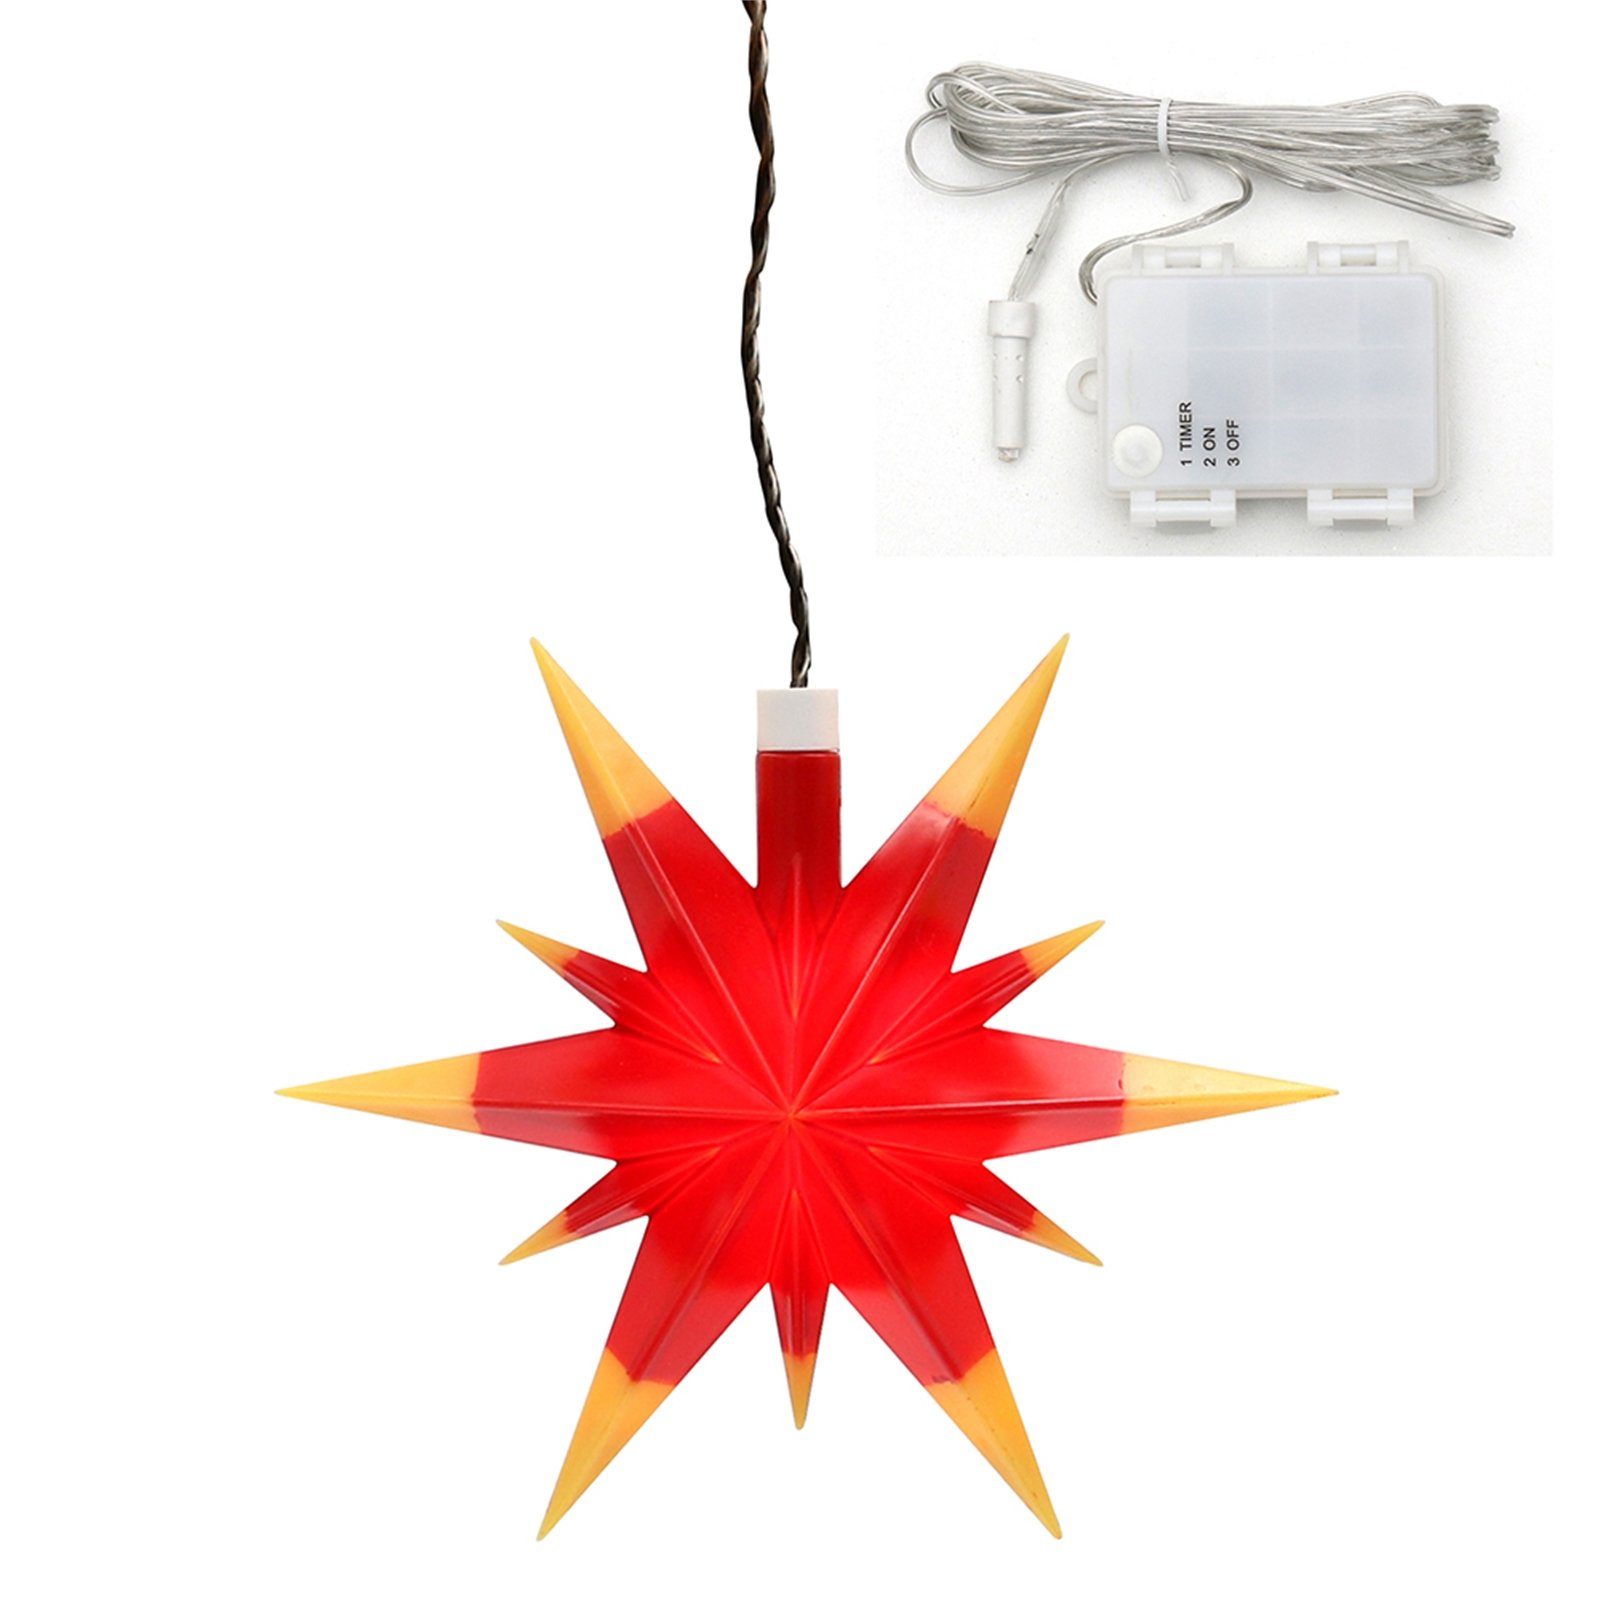 SIGRO LED mit Stern Weihnachtsstern Timer Rot/Gelb, LED